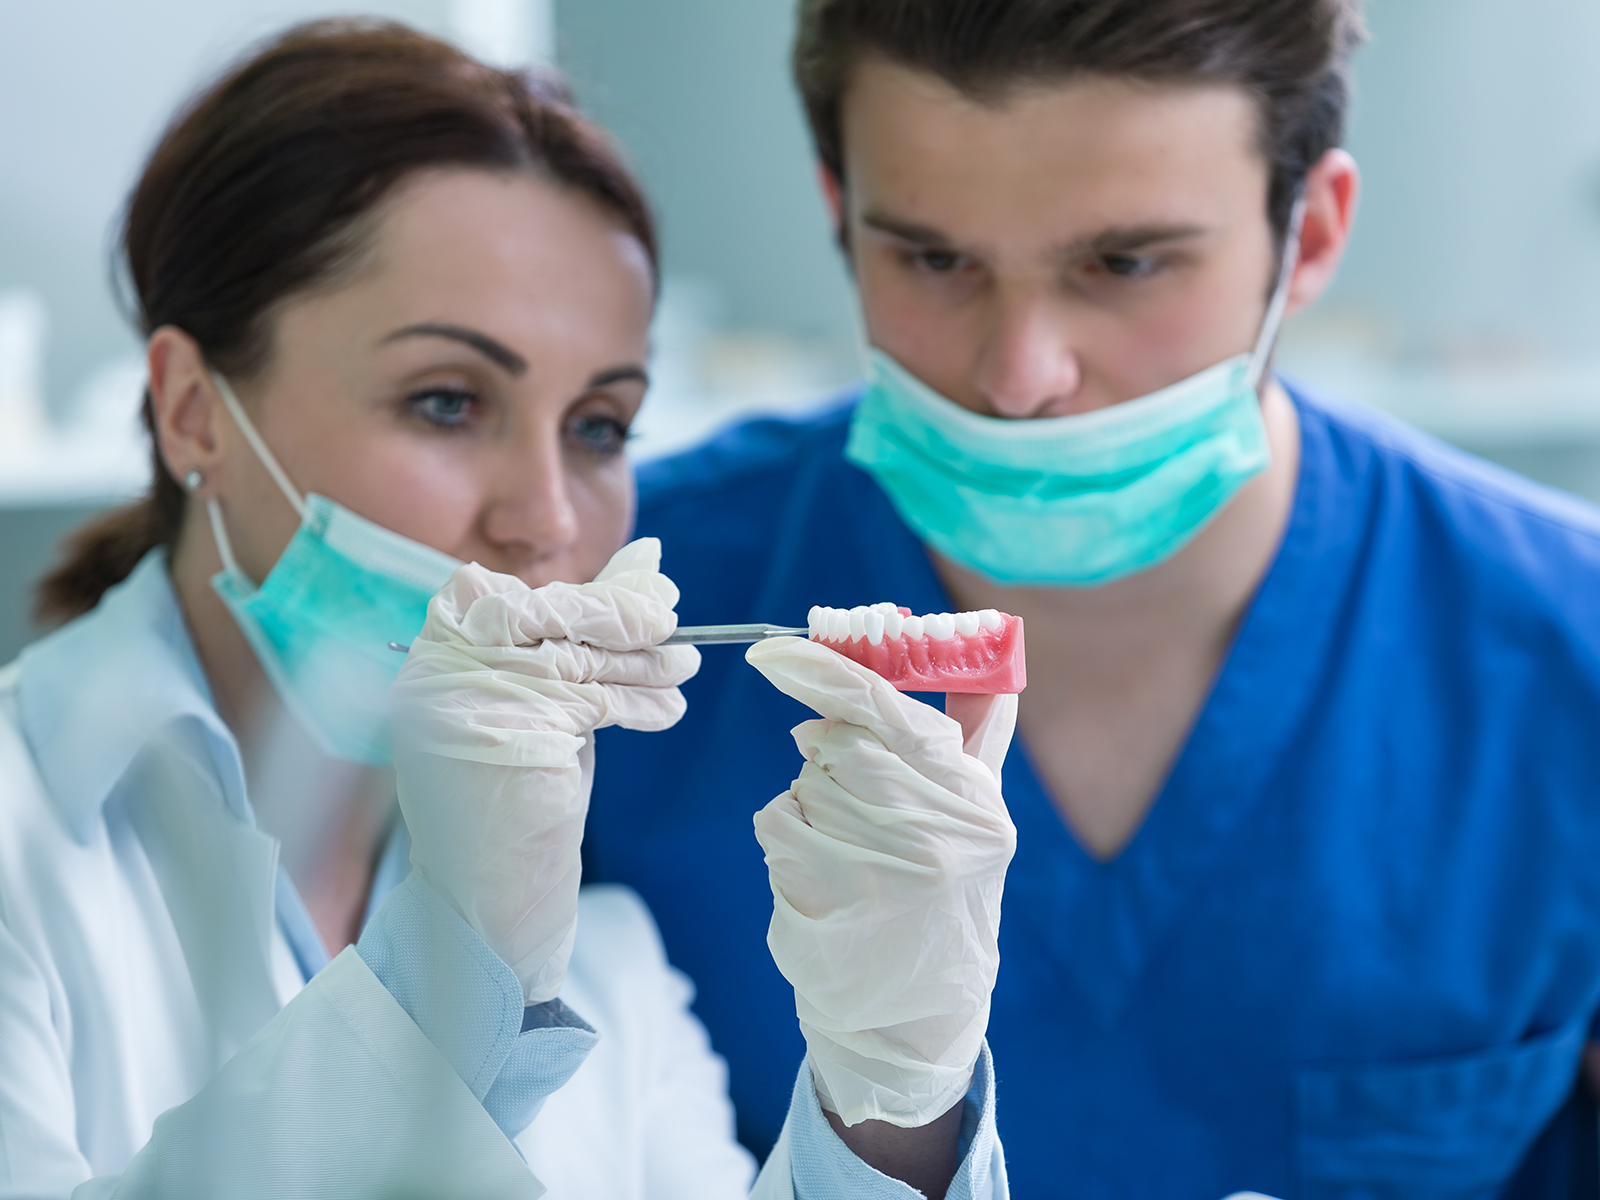 Which material is best for Dentures?